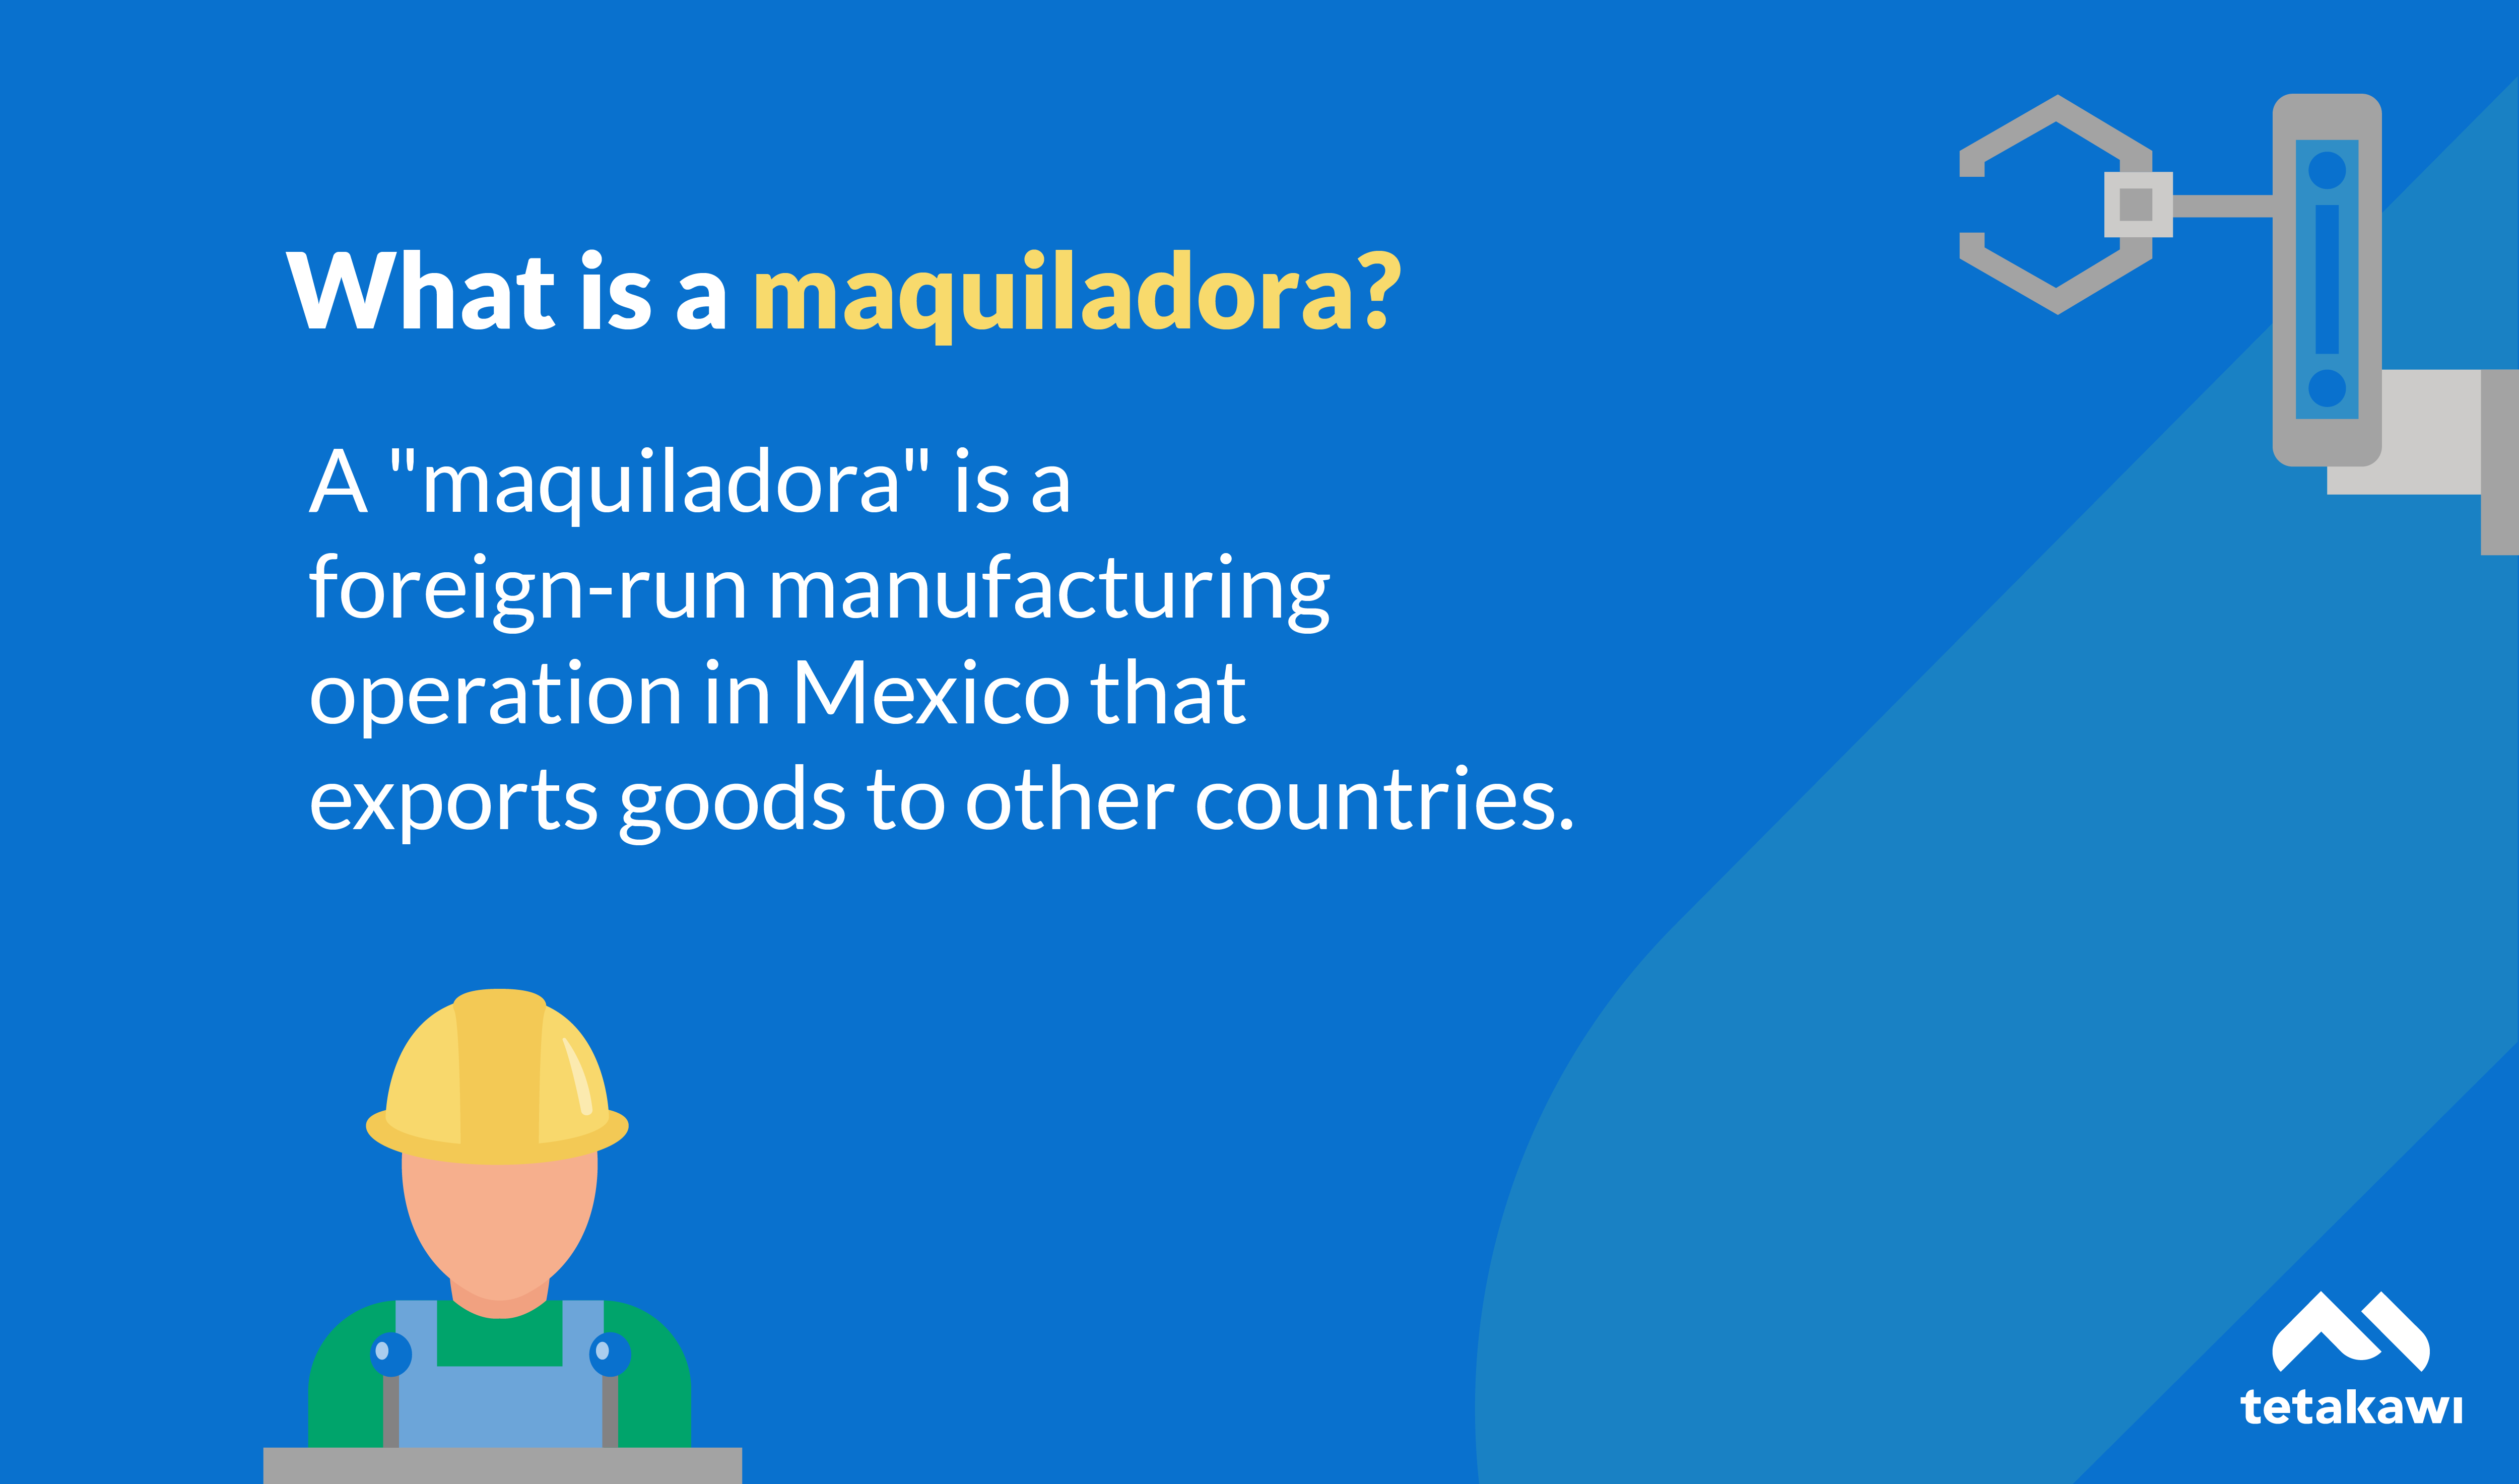 What is a maquiladora in Mexico